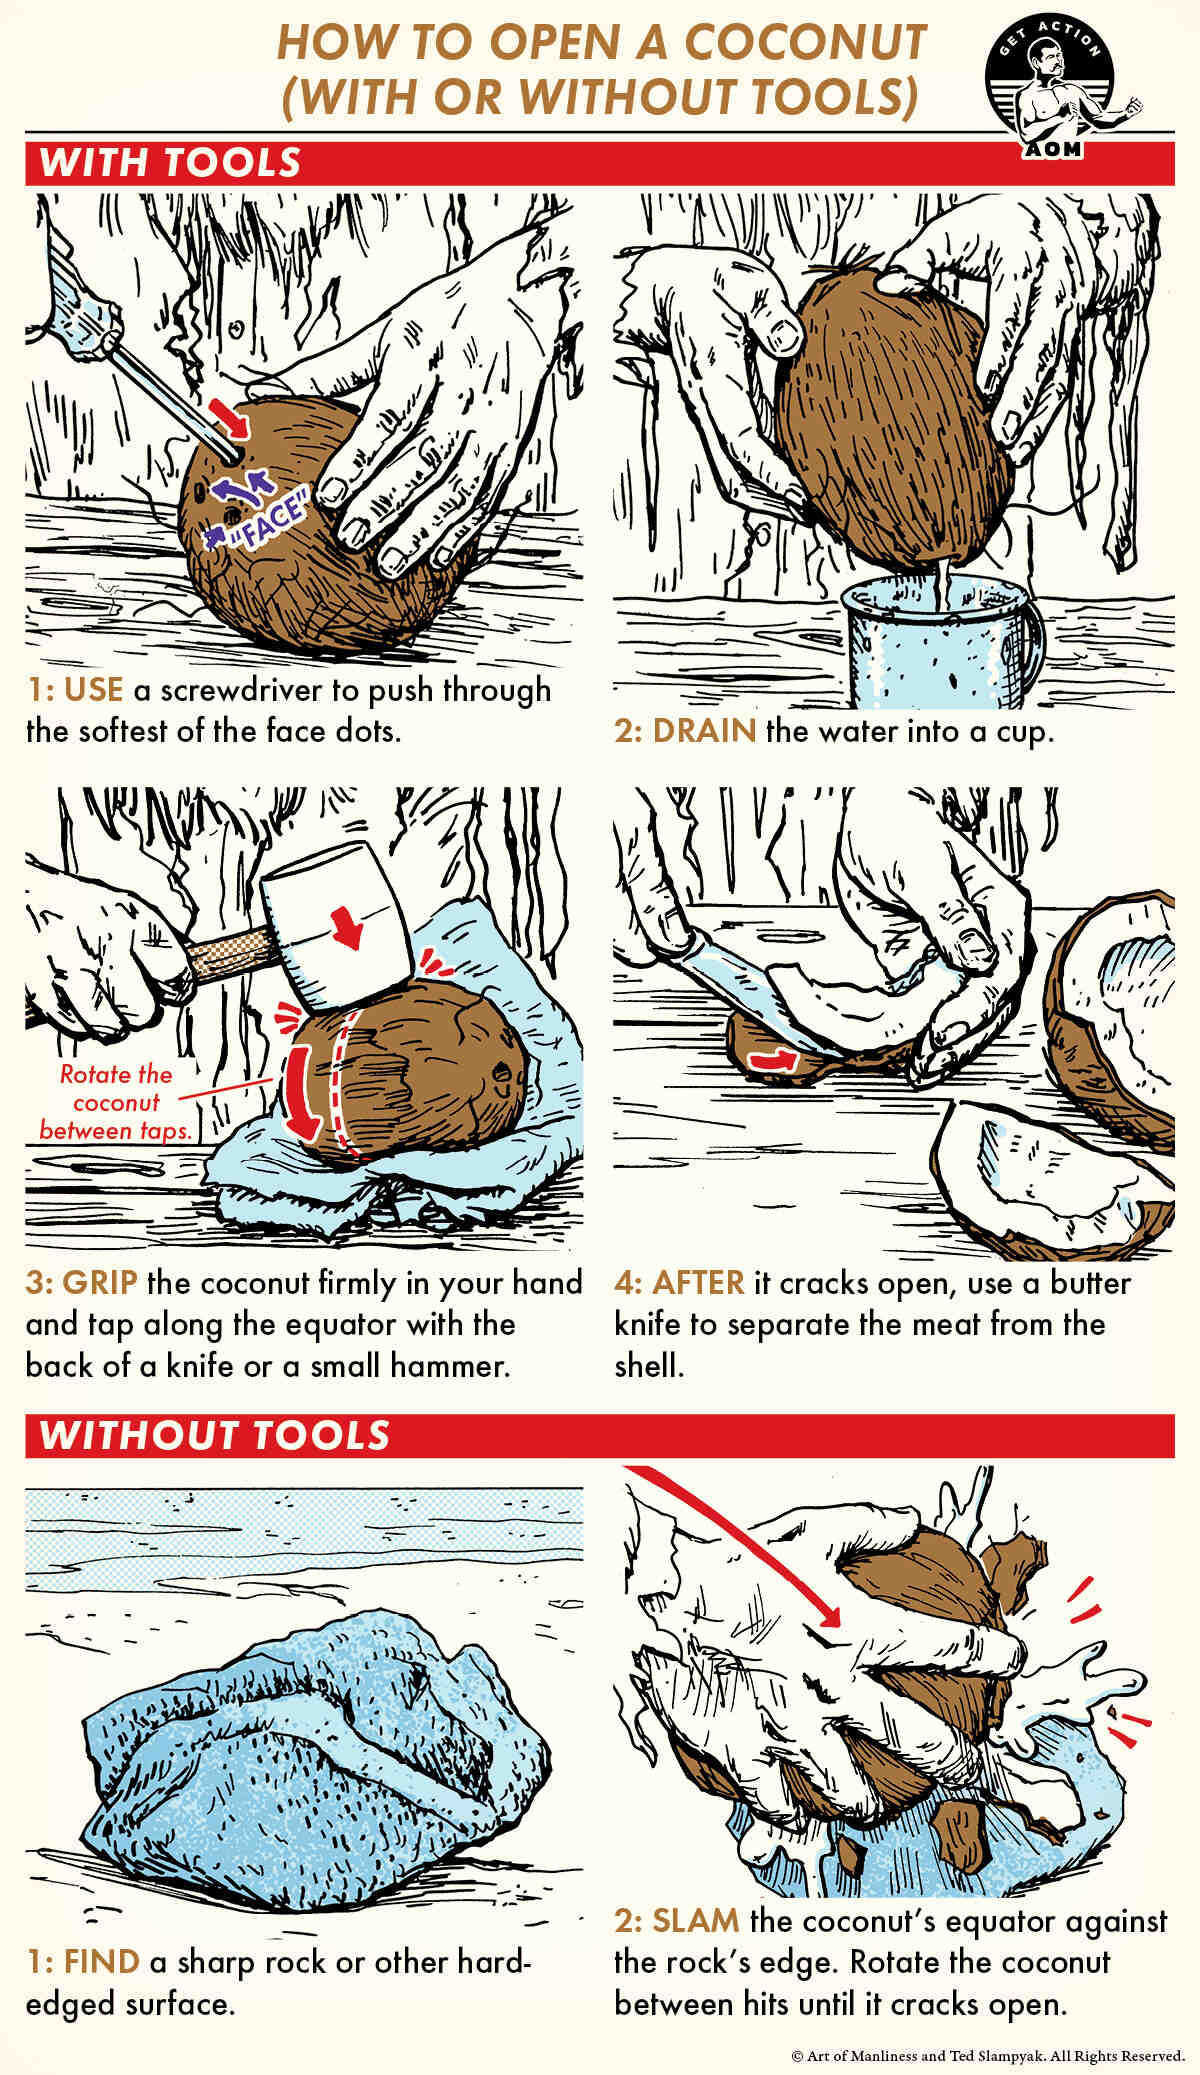 How do you open a coconut without a hammer?